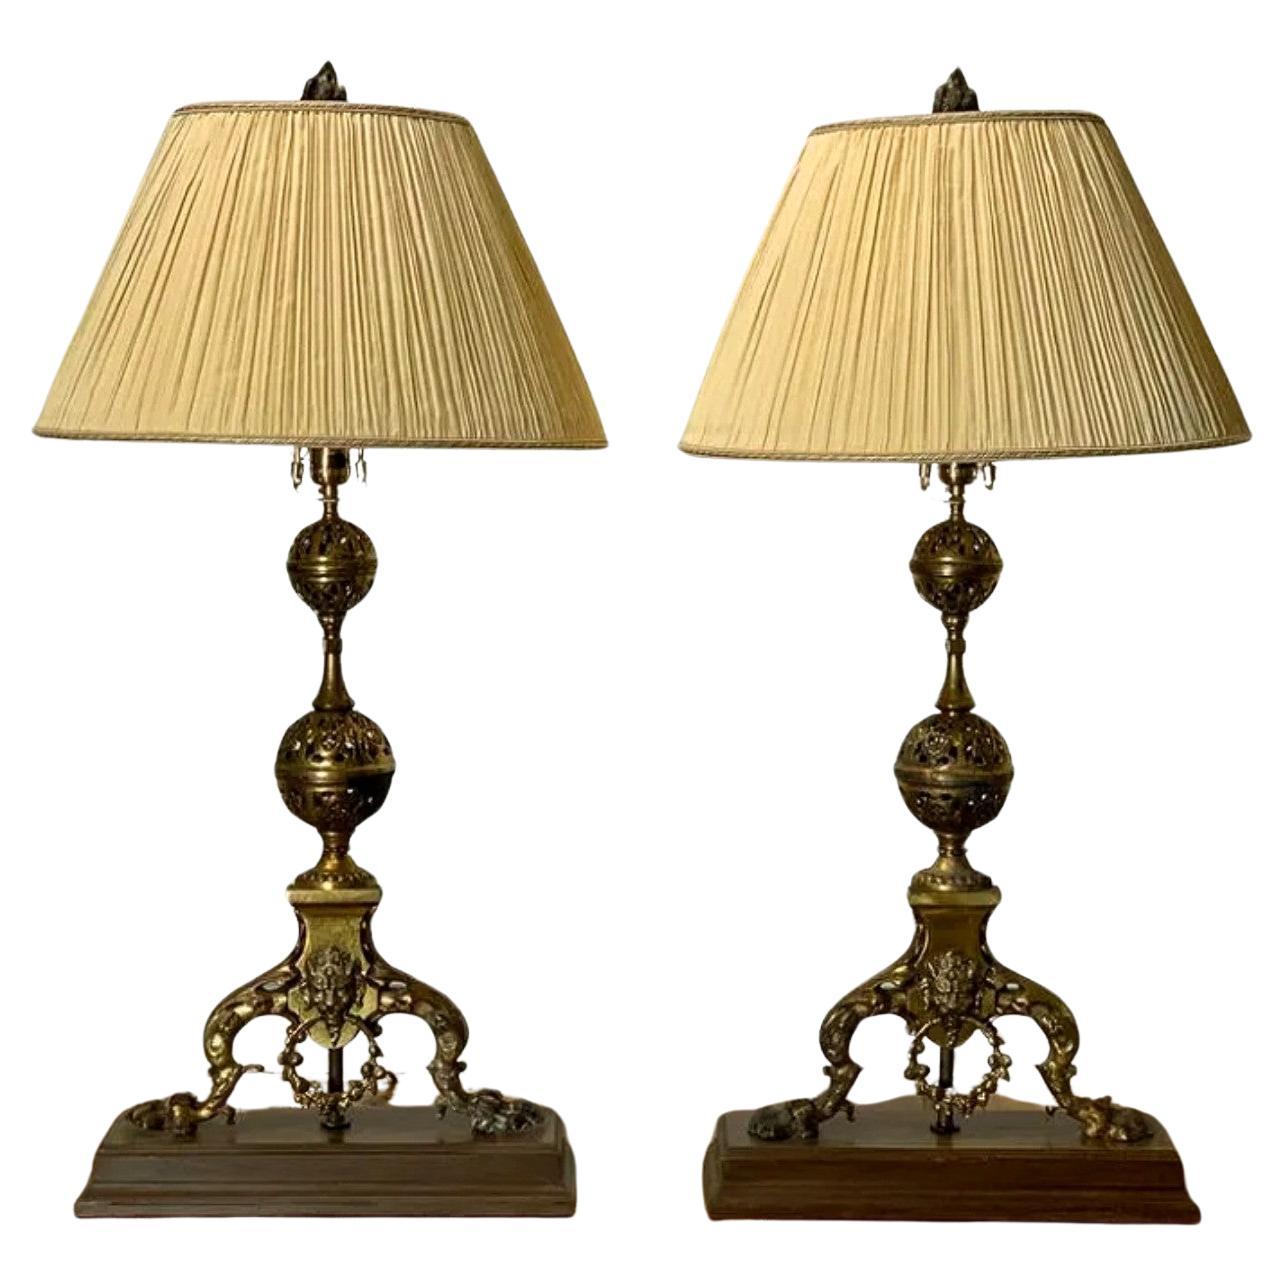 19th Century French Gothic Revival Andirons Mounted As Table Lamps - A Pair 